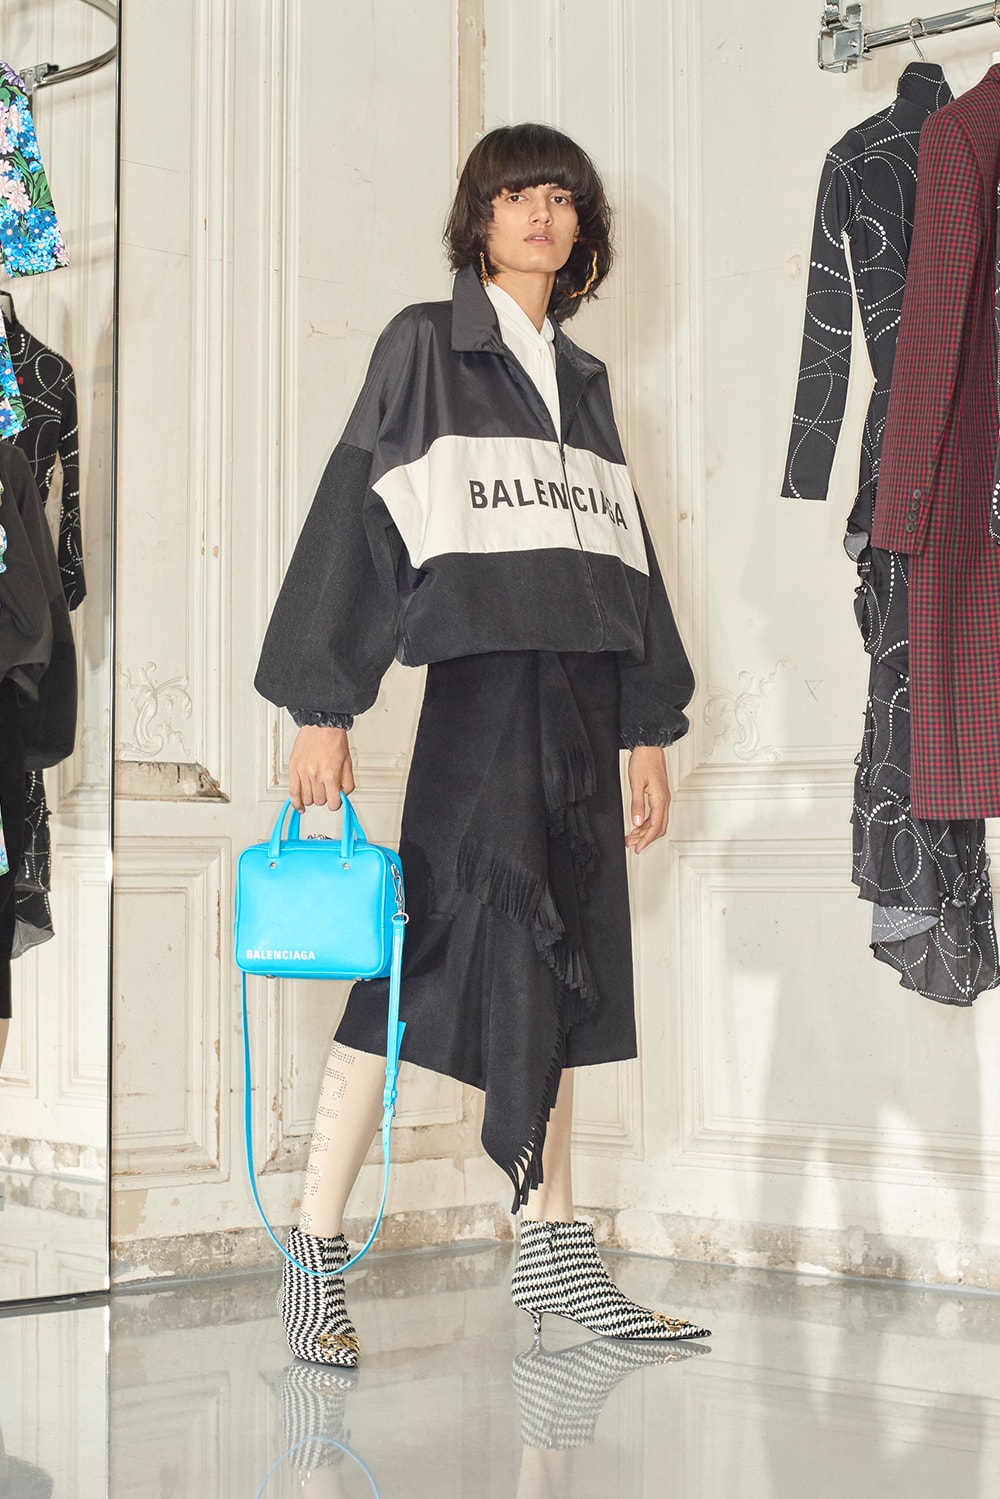 Balenciaga Fall 2018 Collection Lookbook women's outerwear layering streetwear luxury purchase release date price